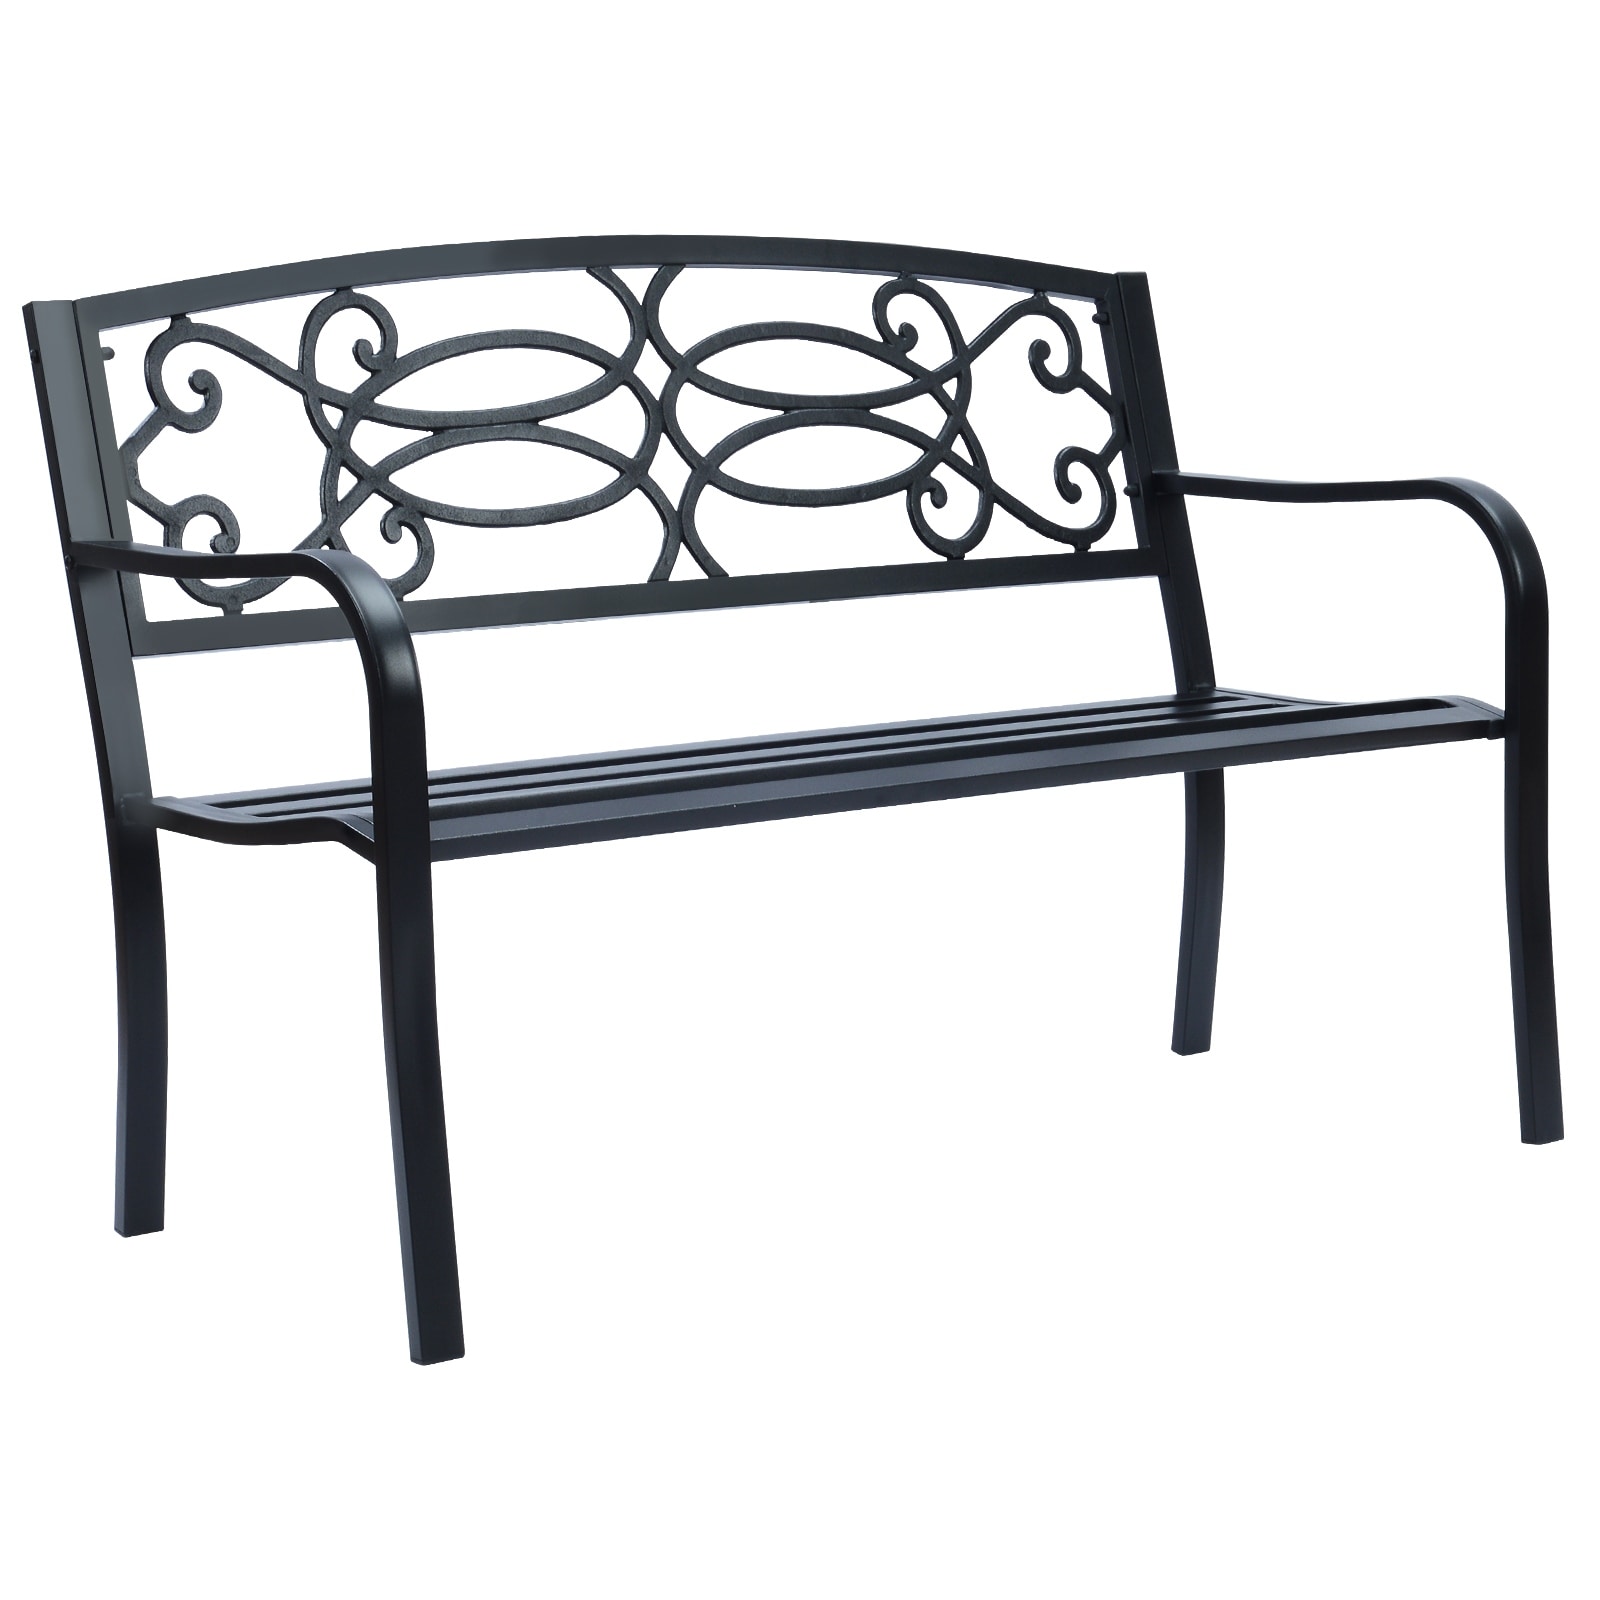 N/A On Garden, - & Bench 33564601 Lawn, Beyond Patio Bench, Metal - Bed - - Sun-Ray Bath Black Outdoor Park by in Marion for Sale Porch, Deck